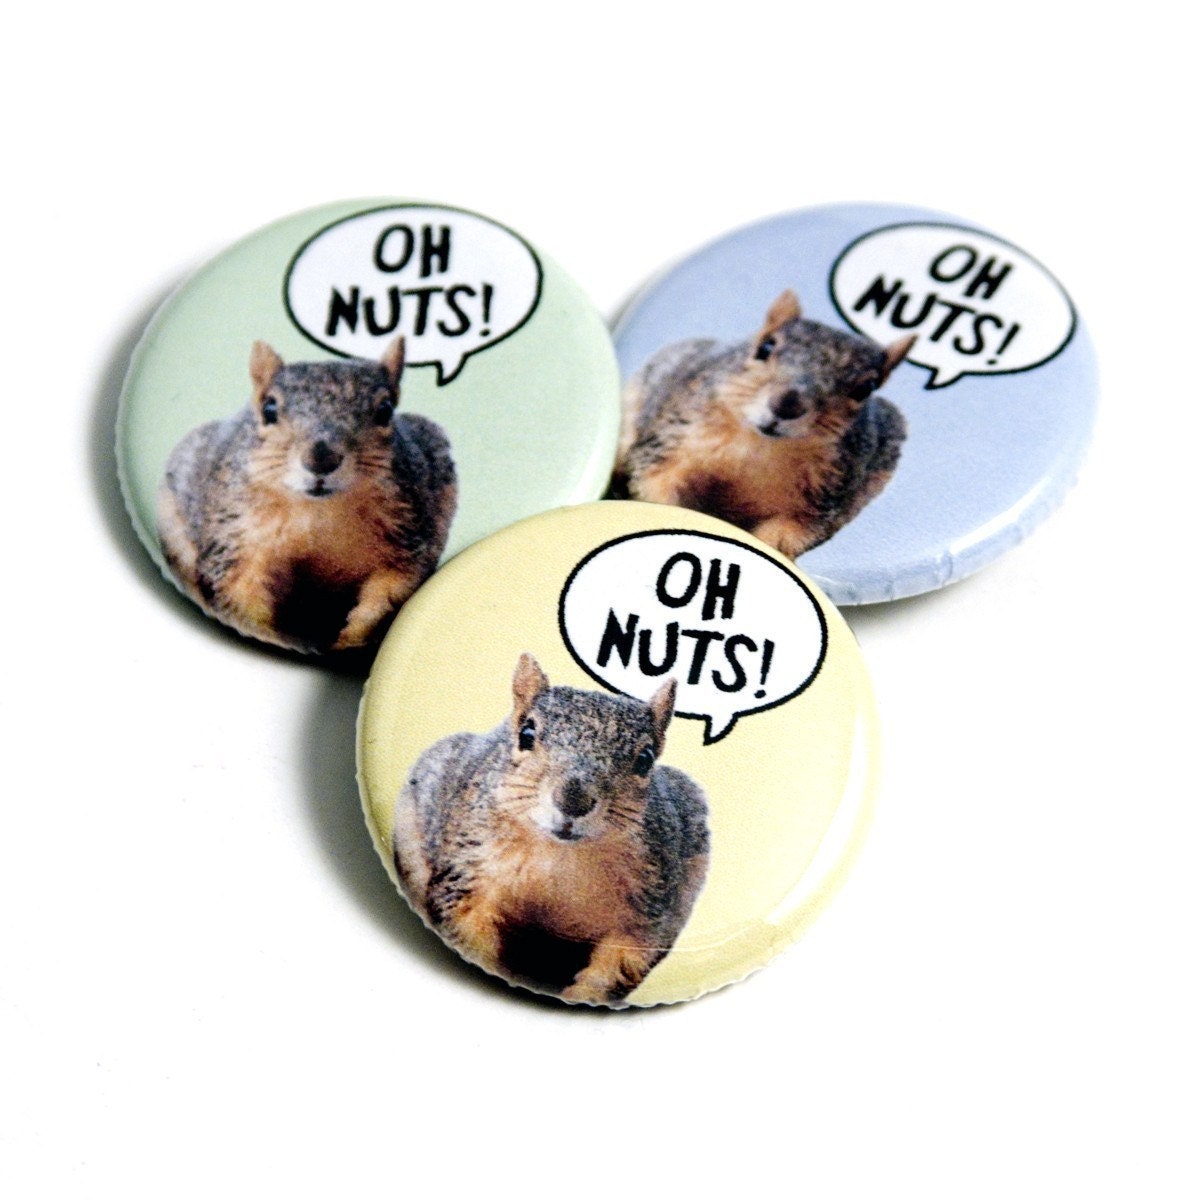 Oh Nuts - squirrel pinback button (QTY 1)